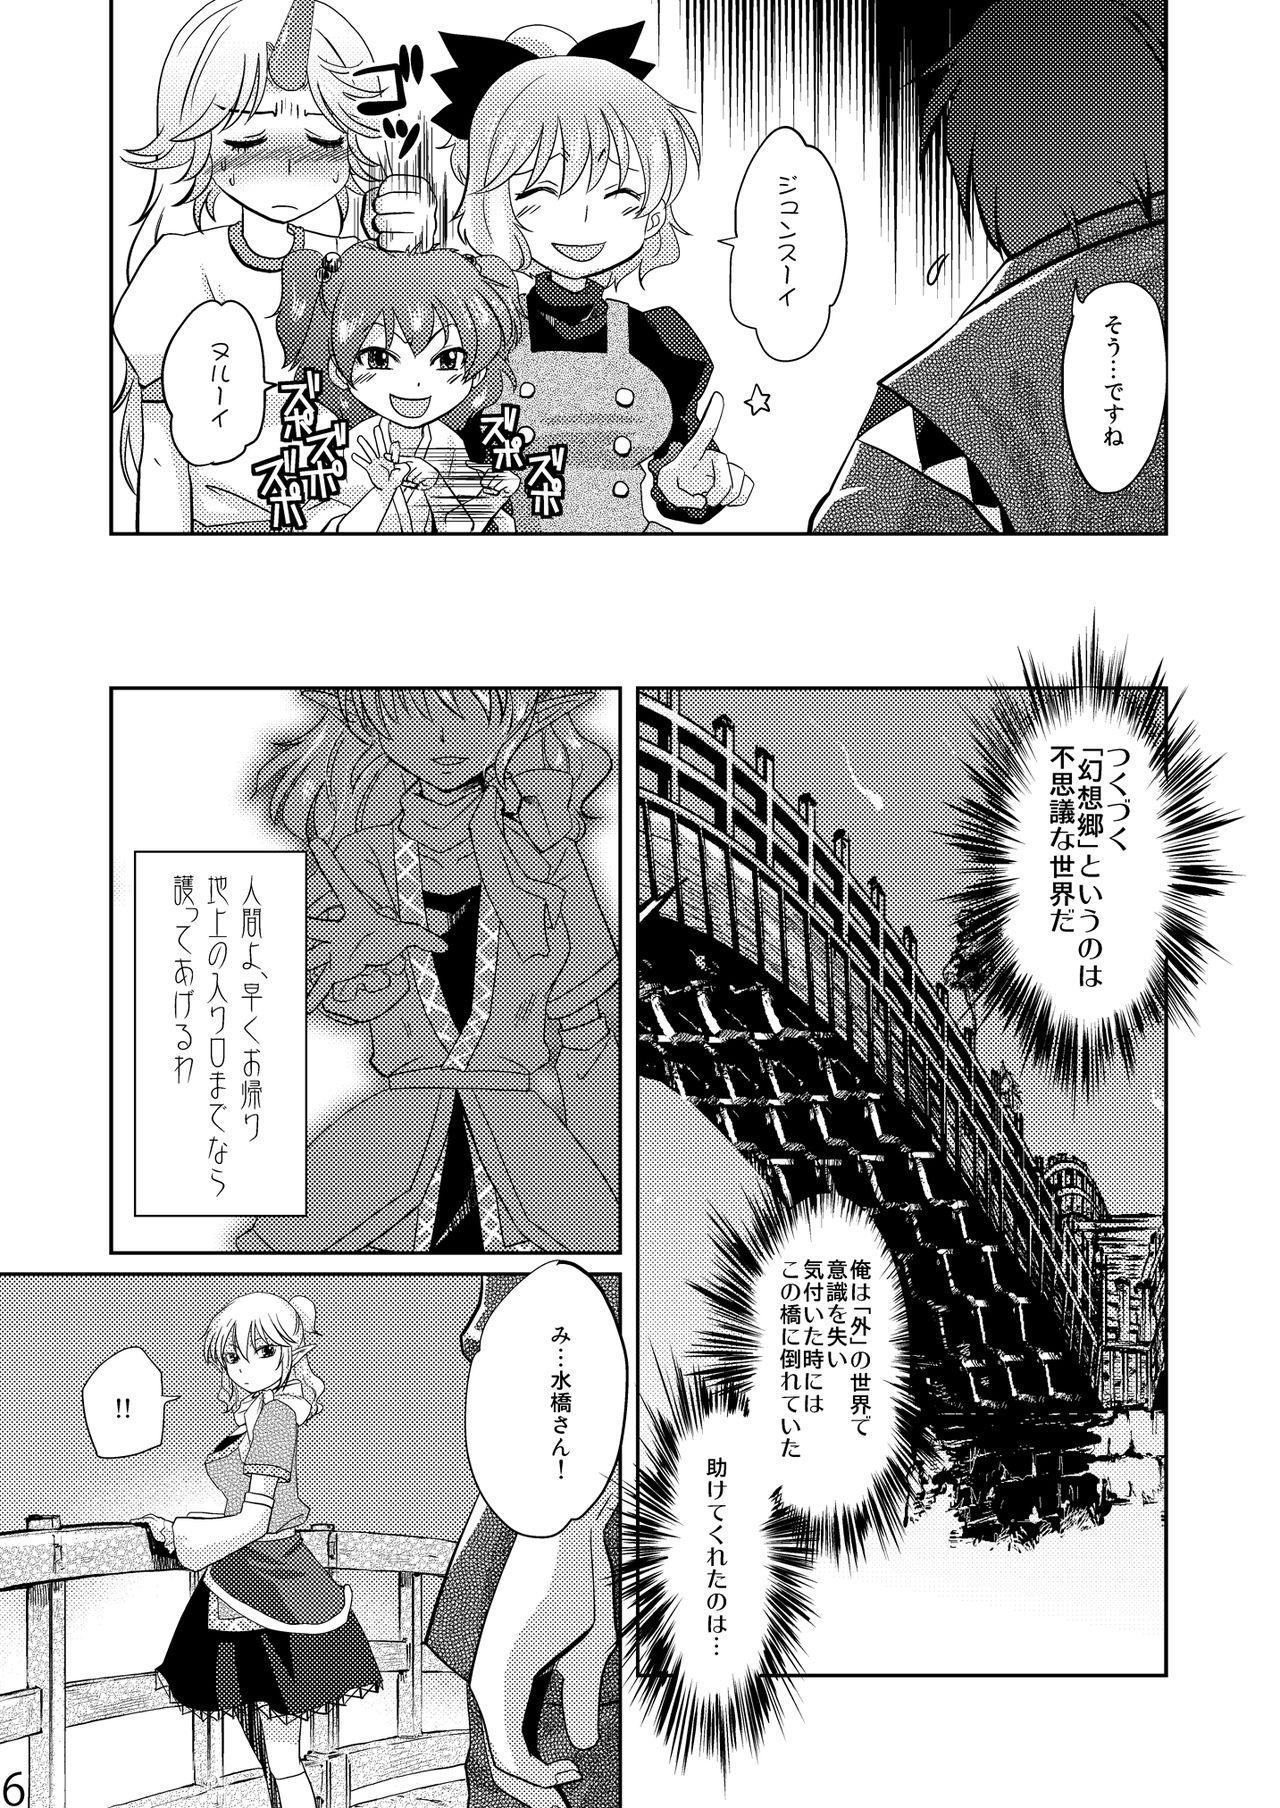 Small Tits Porn Opparusui - Touhou project Funny - Page 6